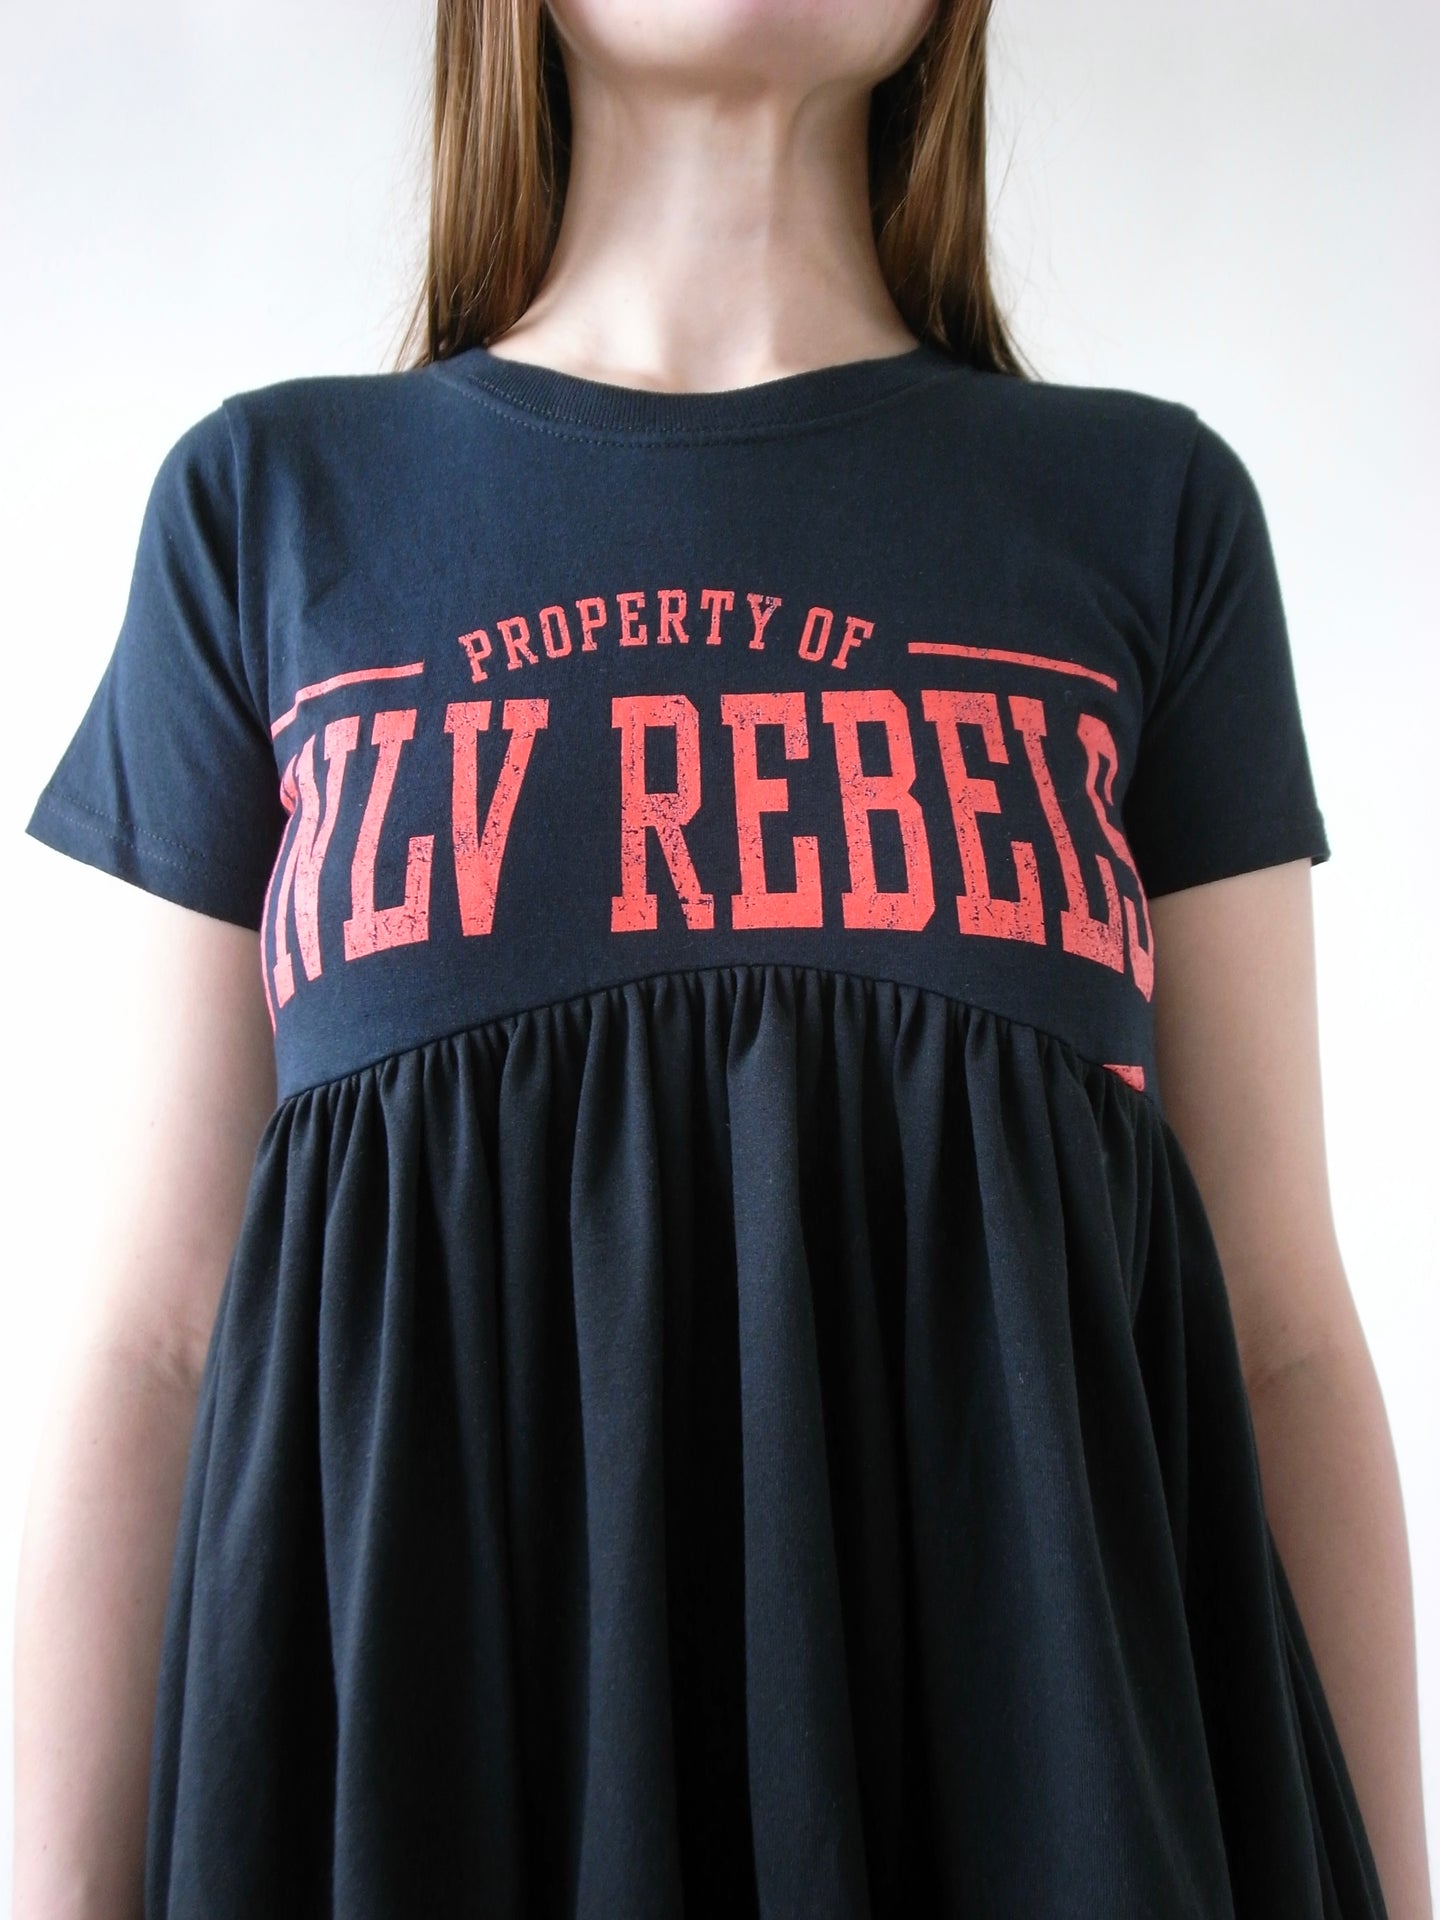 The Reconstituted T-shirt Baby Doll Mini